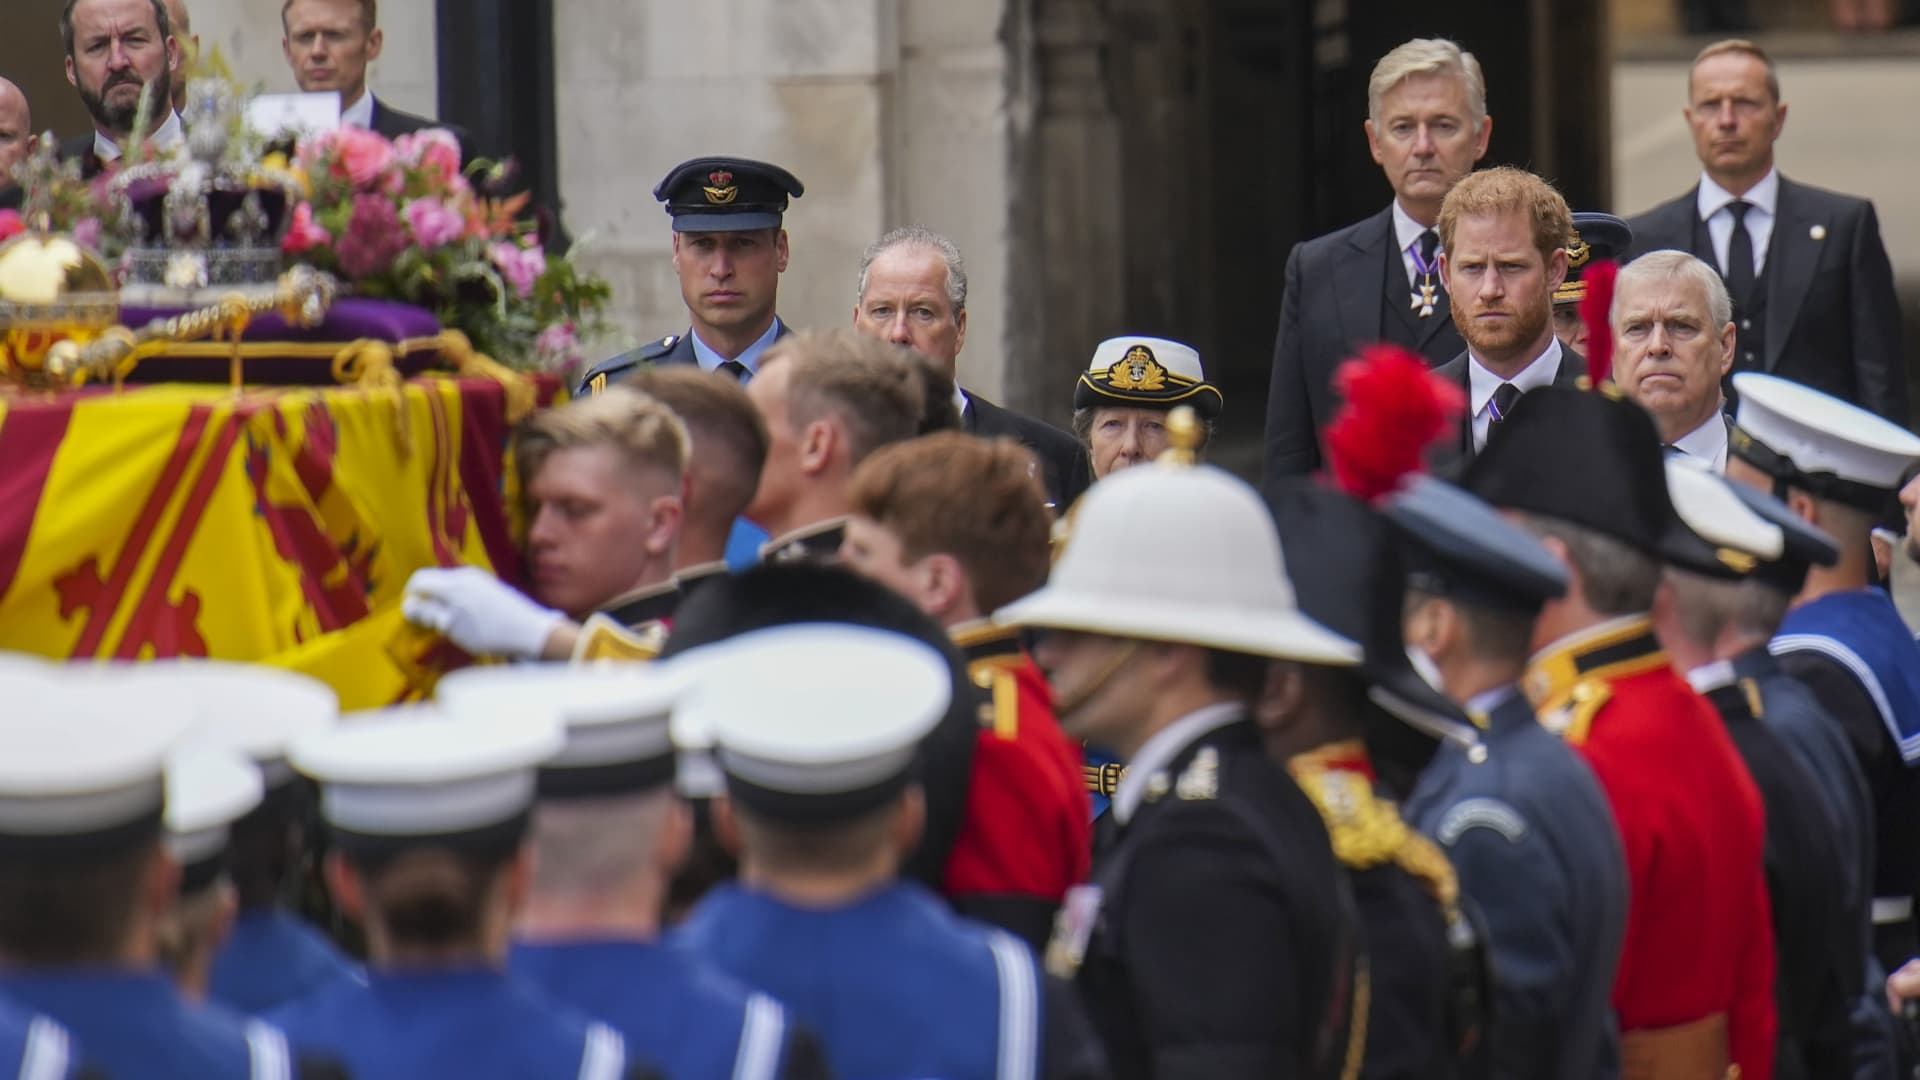 Who is and is not attending Queen Elizabeth II’s funeral in London